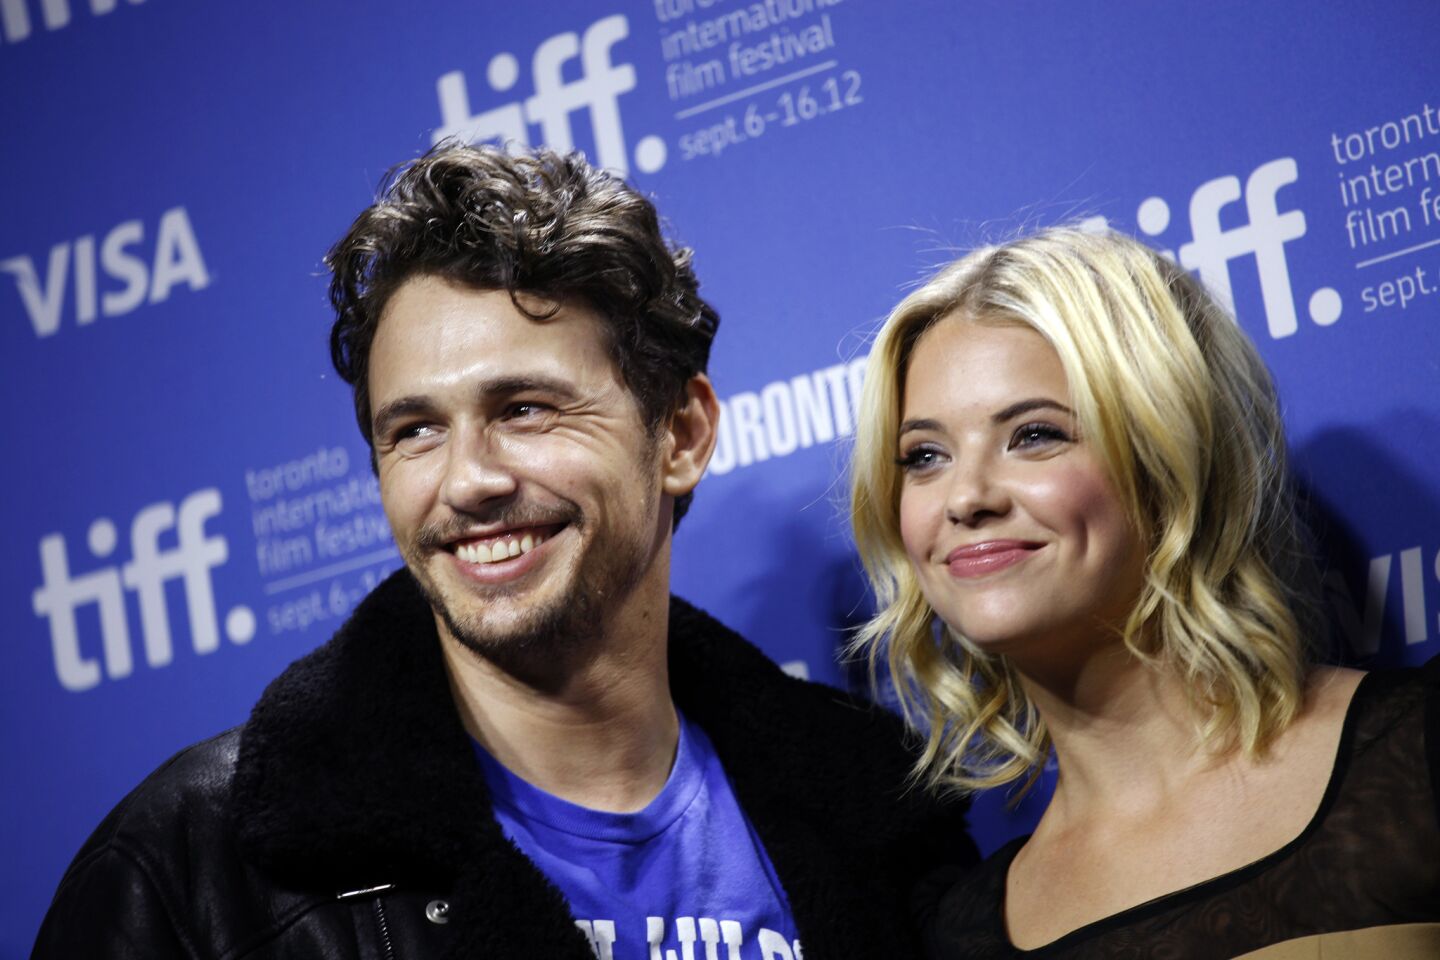 James Franco and Ashley Benson play Alien and Brit in "Spring Breakers," which premiered at the Toronto International Film Festival.